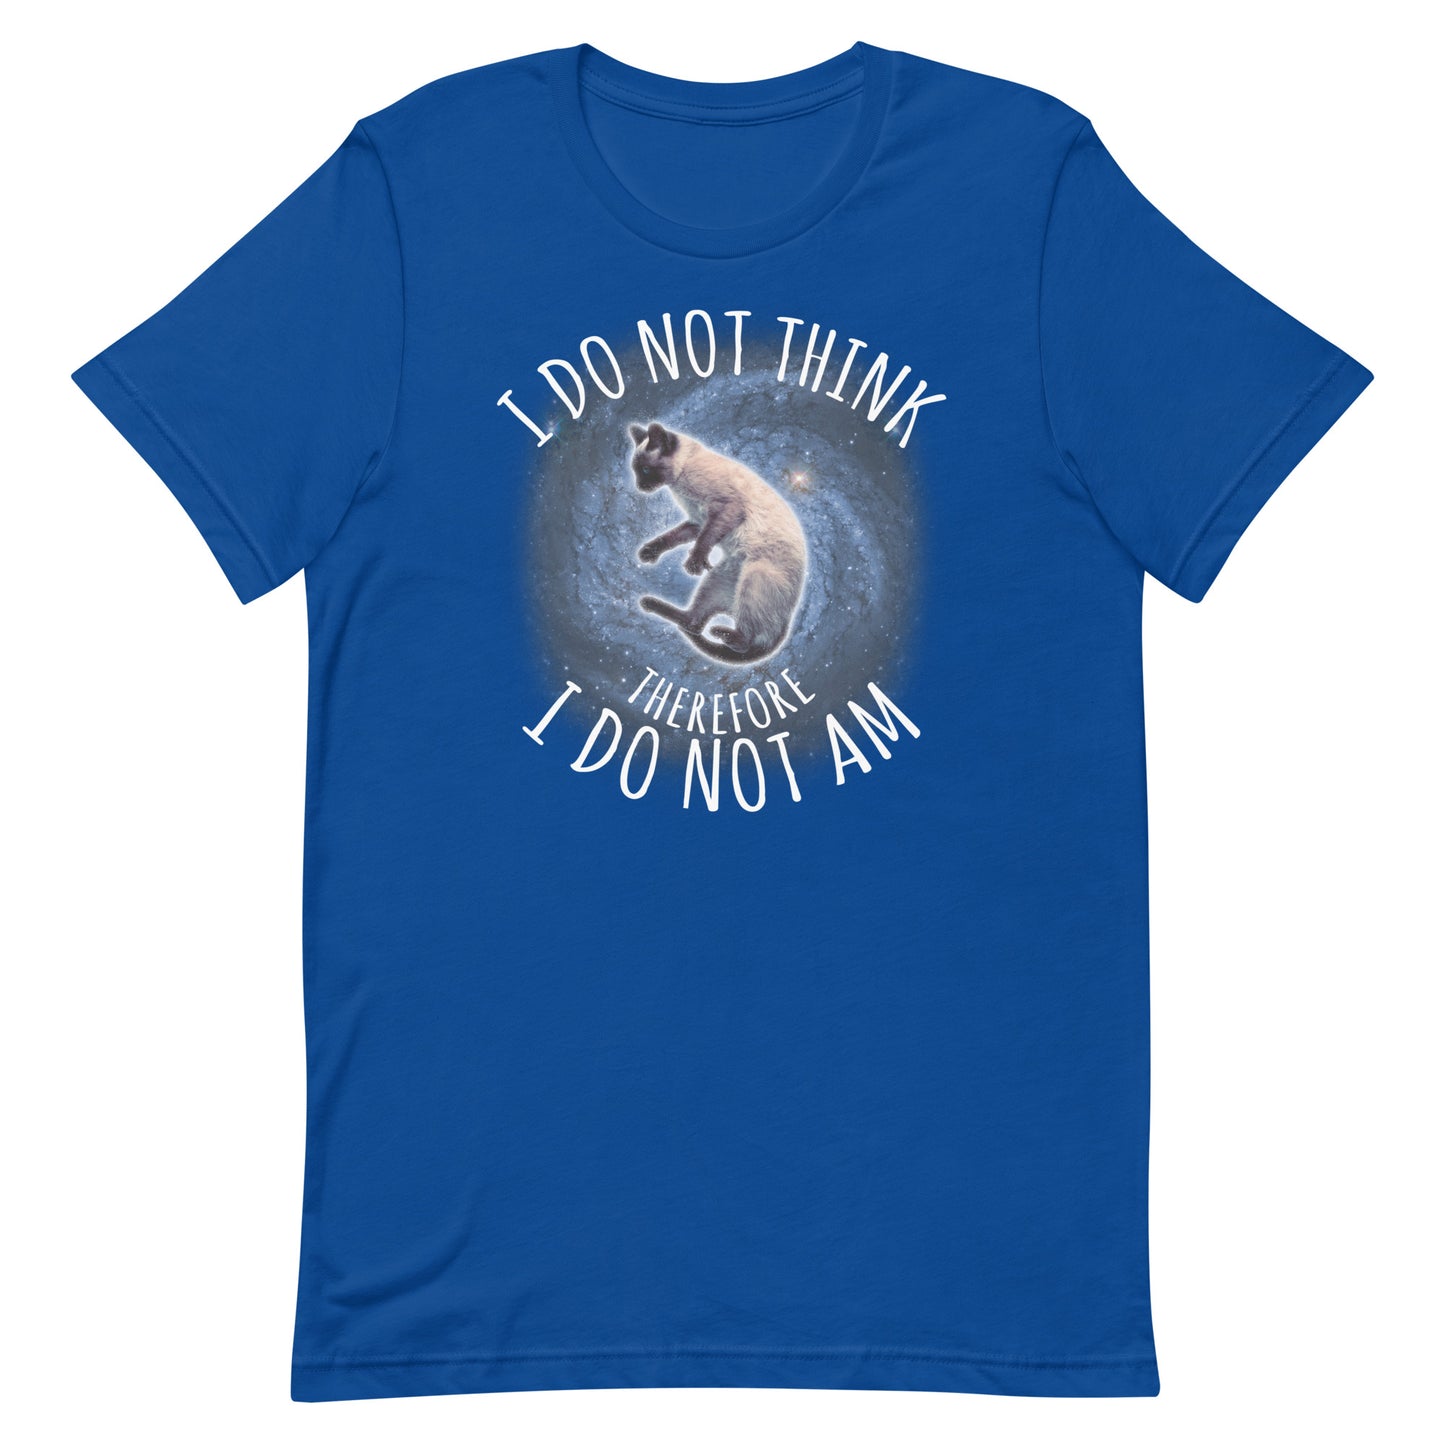 I Do Not Think Therefore I Do Not Am Unisex t-shirt